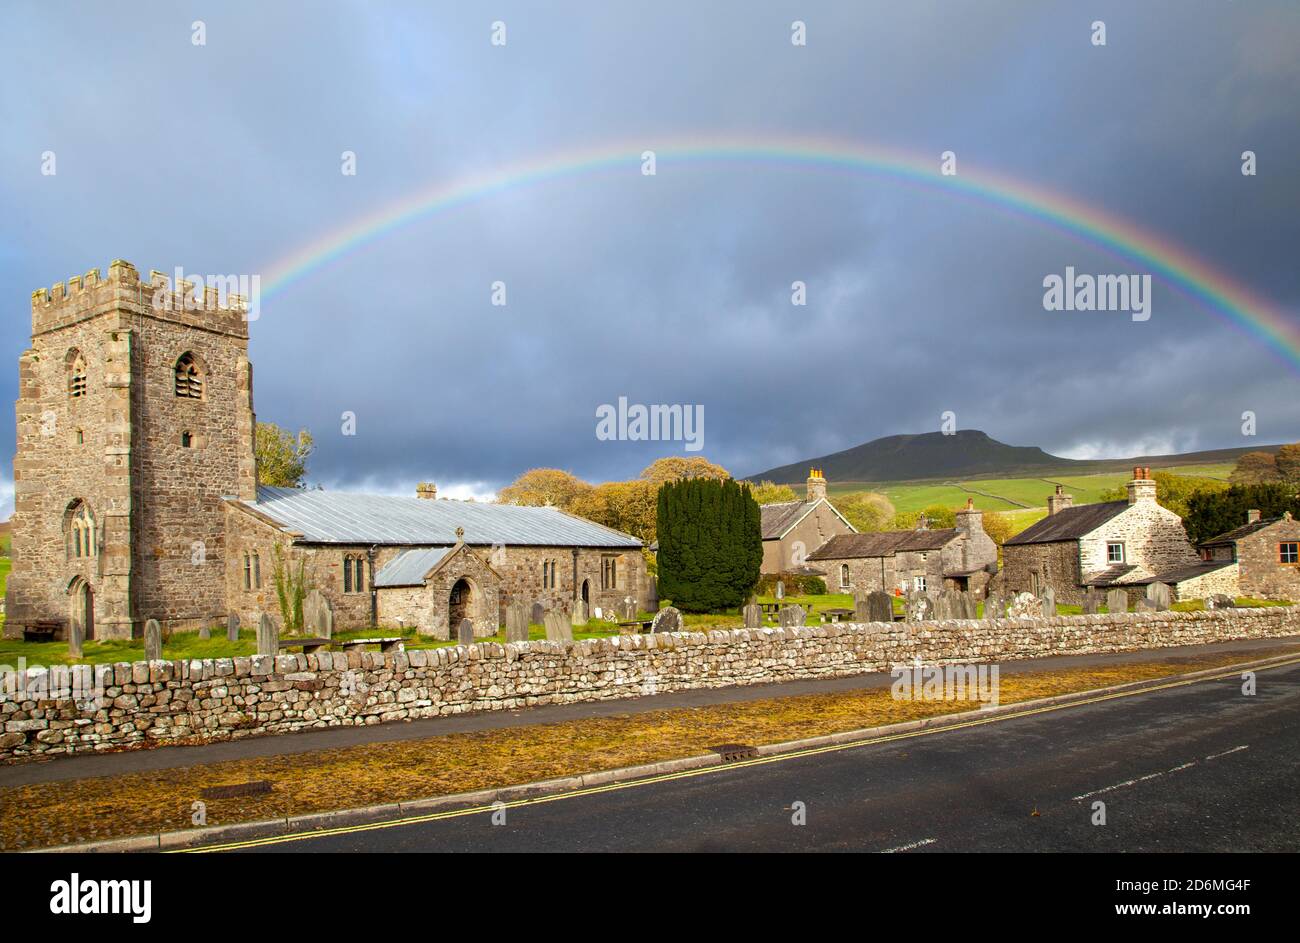 Rainbow over the village church of St Oswalds in the Yorkshire village of Horton in Ribblesdale with the mountain of Pen-y-ghent  on the Pennine Way Stock Photo